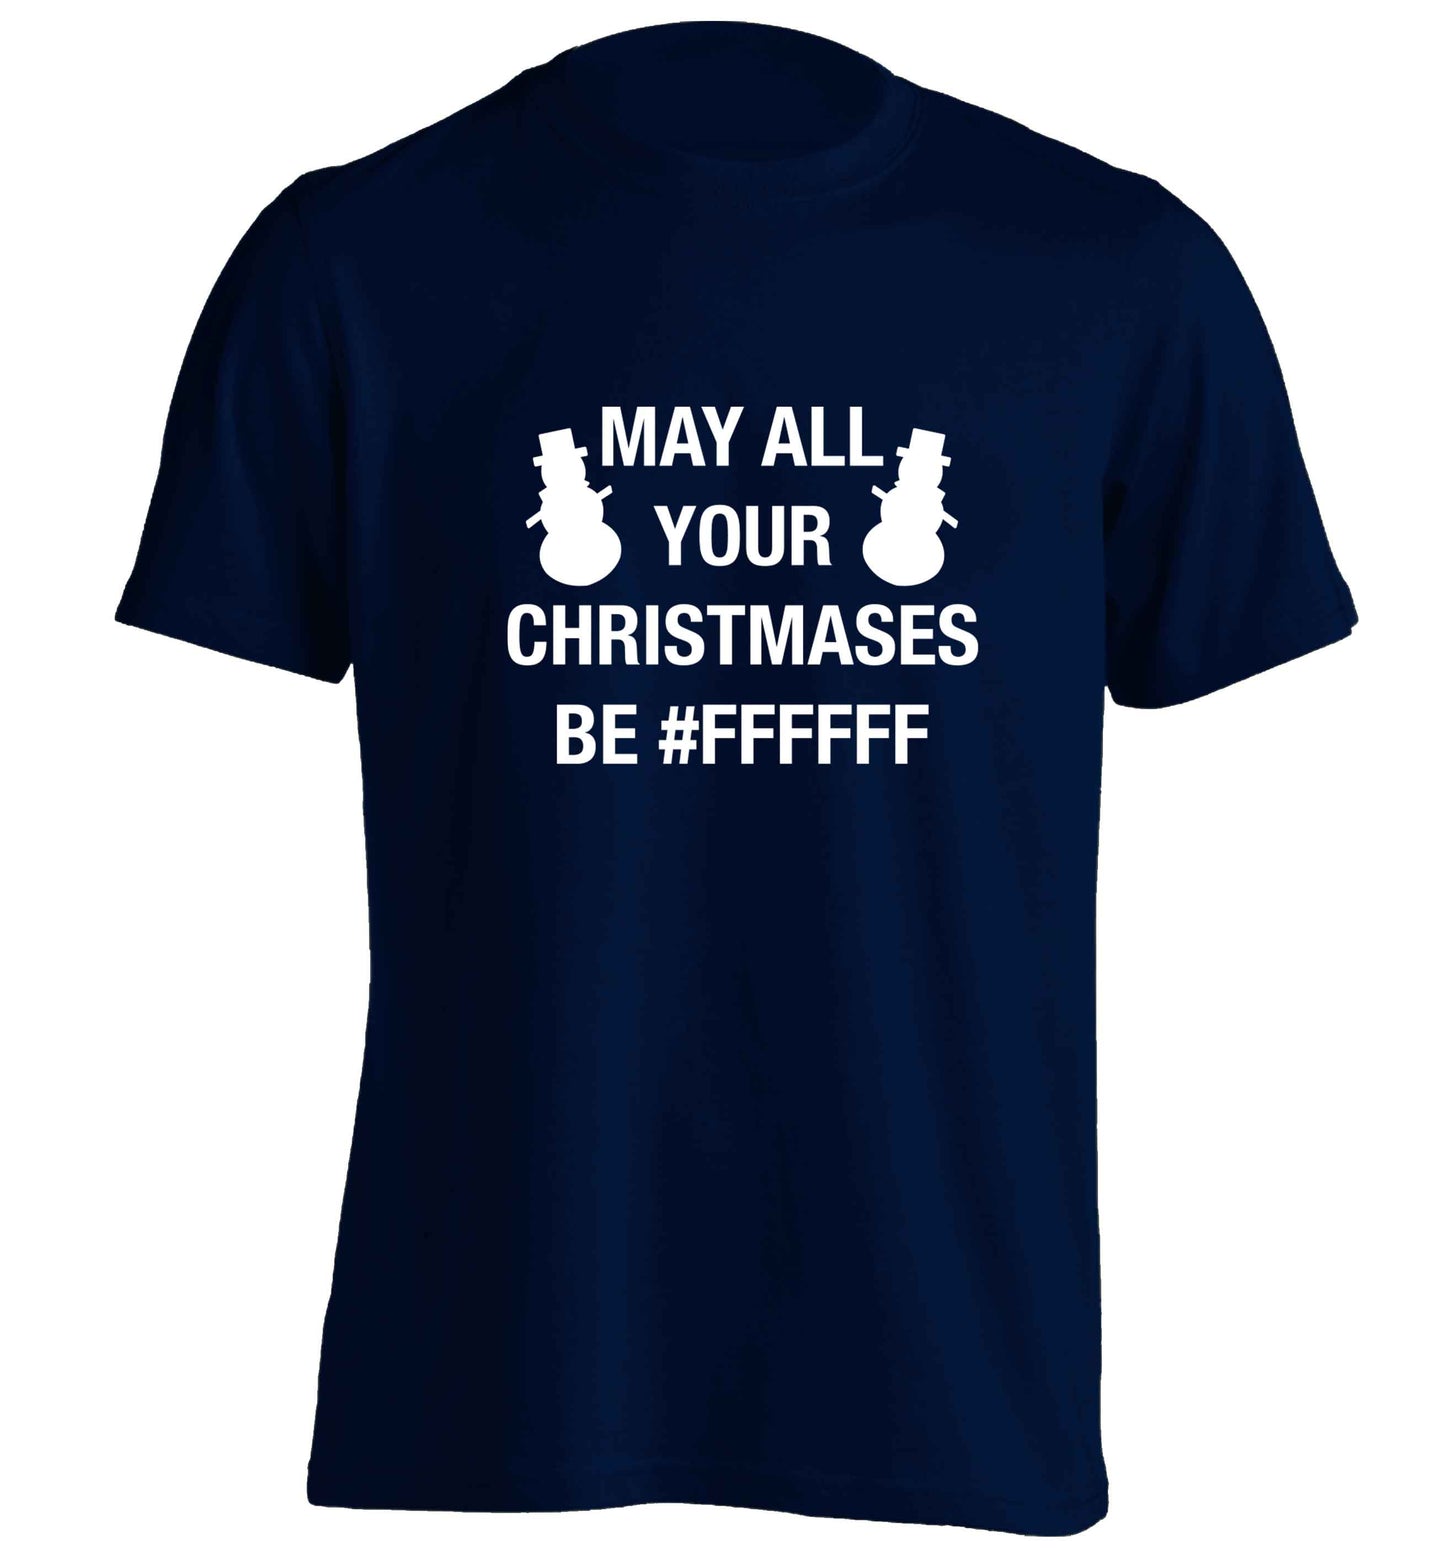 May all your Christmases be #FFFFFF adults unisex navy Tshirt 2XL